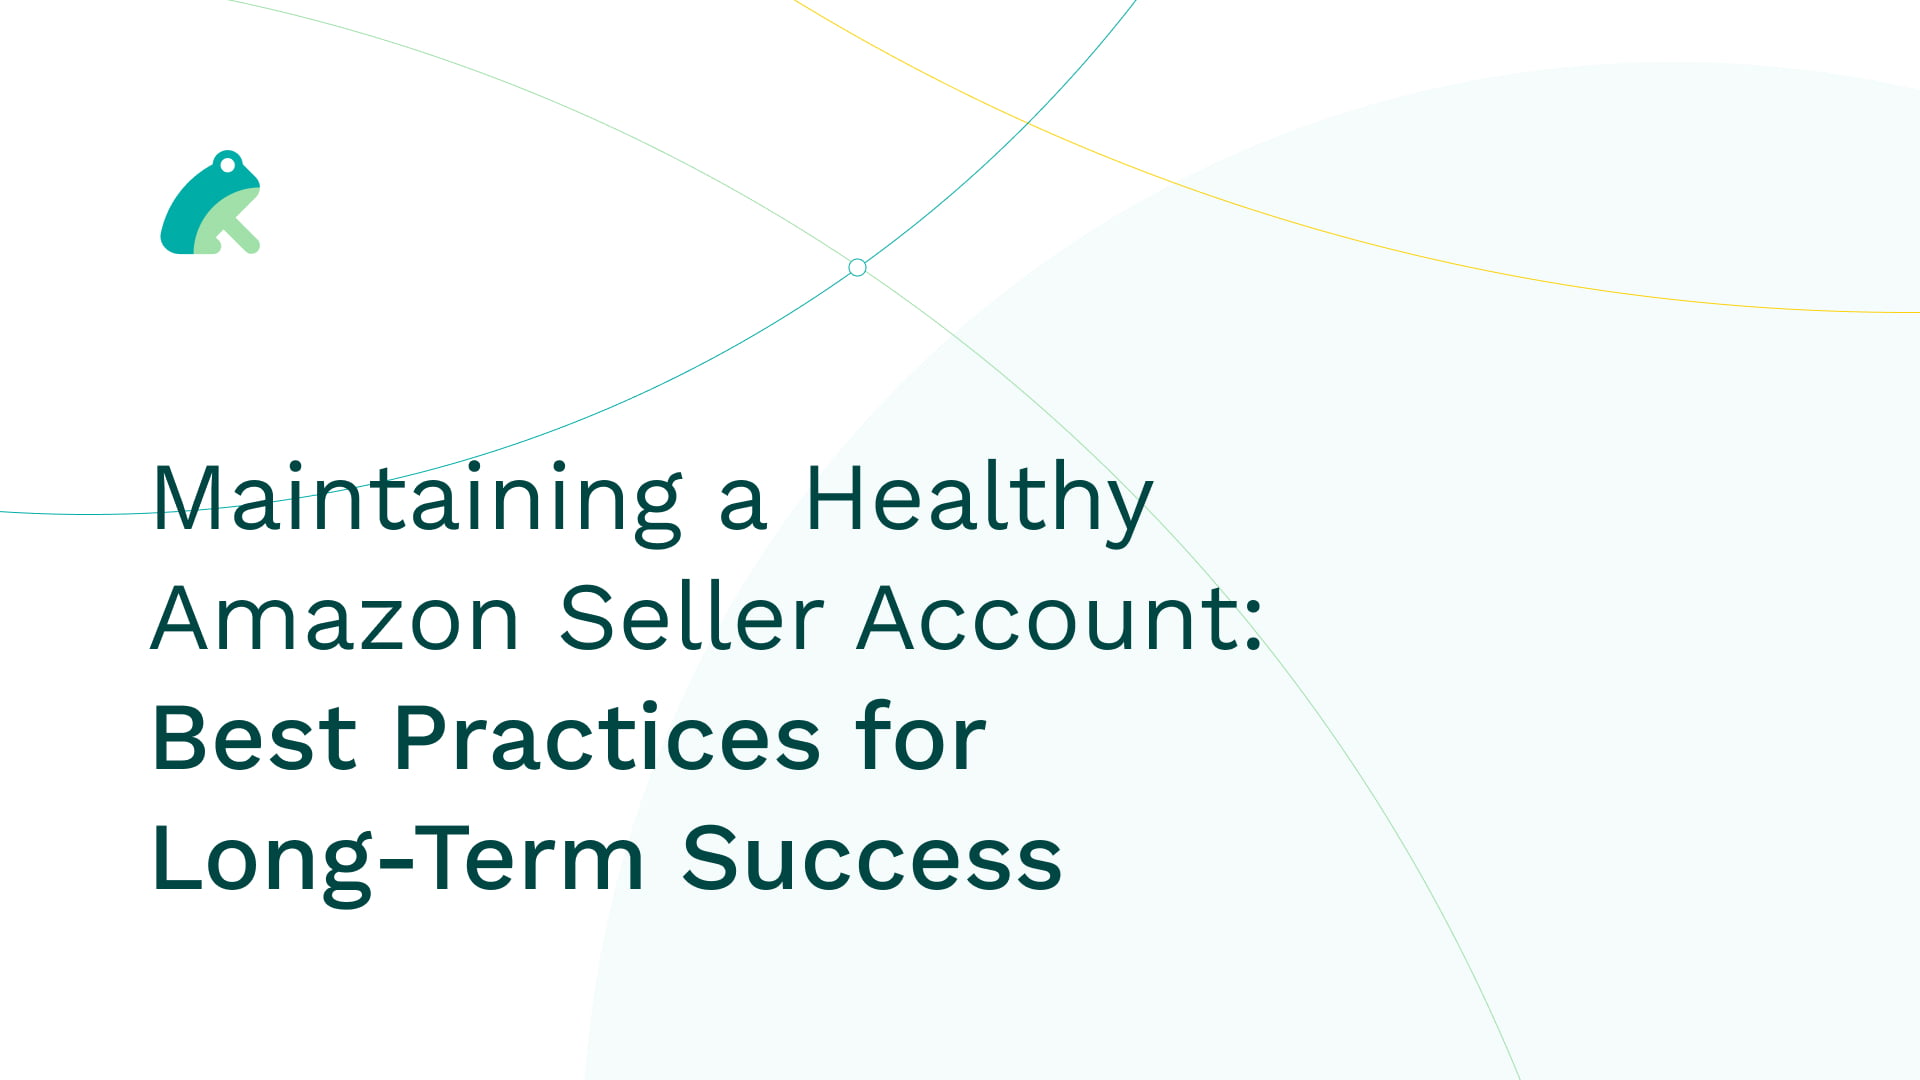 Maintaining a Healthy Amazon Seller Account: Best Practices for Long-Term Success